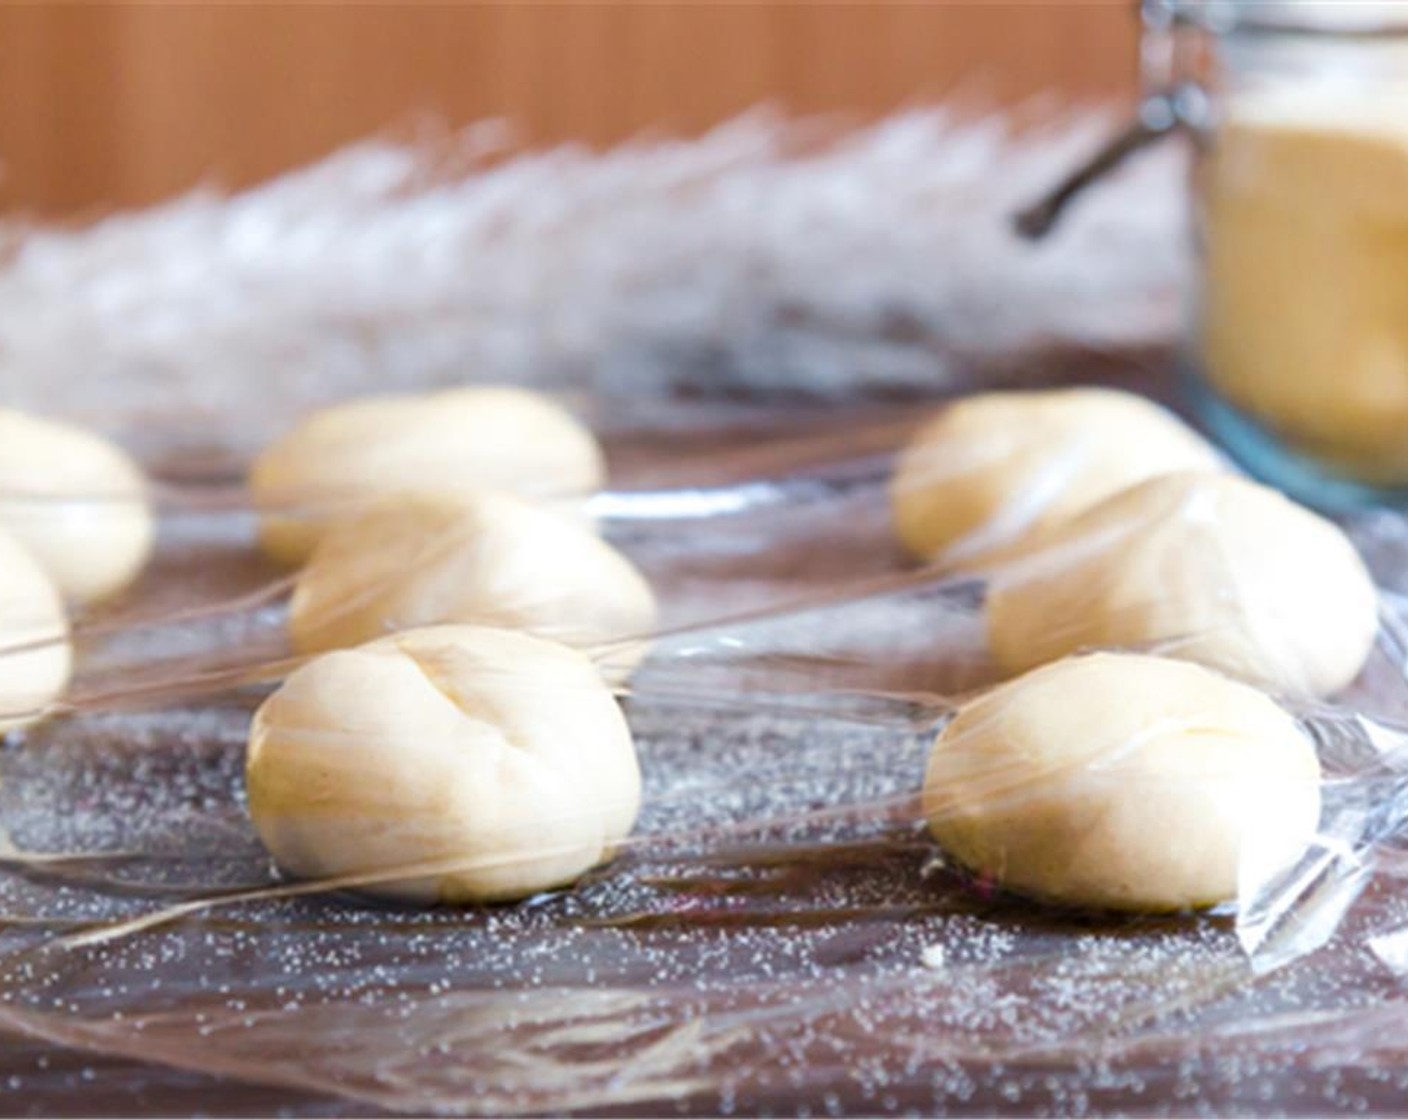 step 3 Once your dough is ready, divide the dough in small balls, place on a tray, lightly drizzle with some Vegetable Oil (2 Tbsp) and cover with cling film for 40 minutes in a warm place.